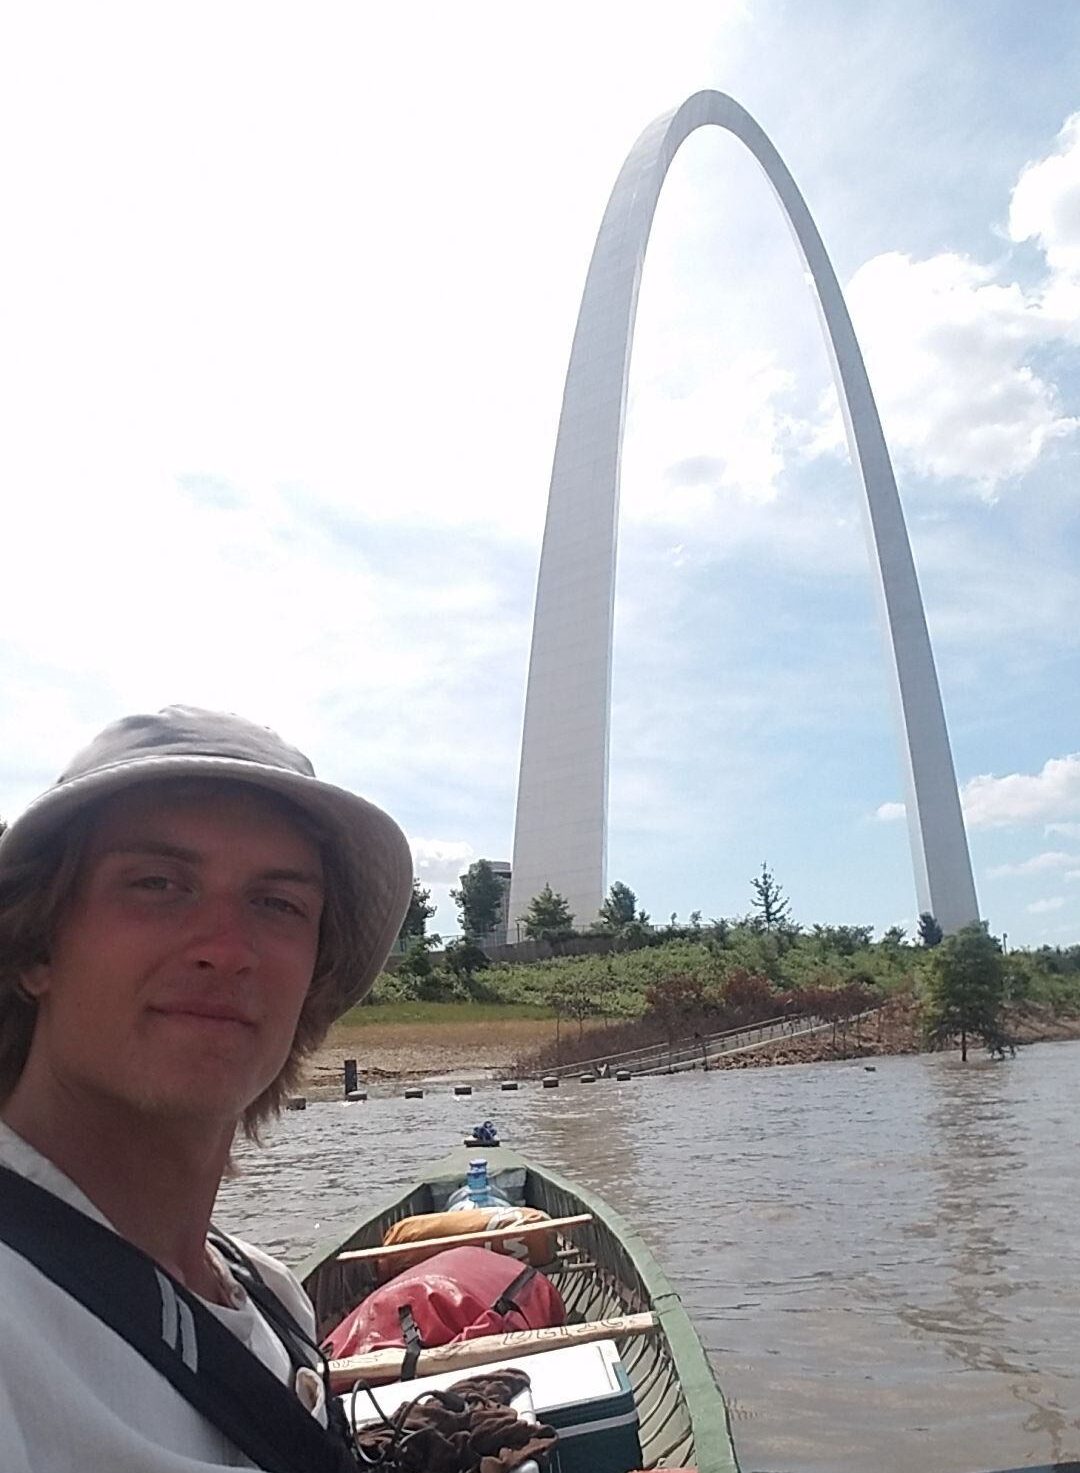 Luke Yourzak, a young white man, smiles at the camera while sitting in a canoe on the Mississippi River with the St Louis arch in the background